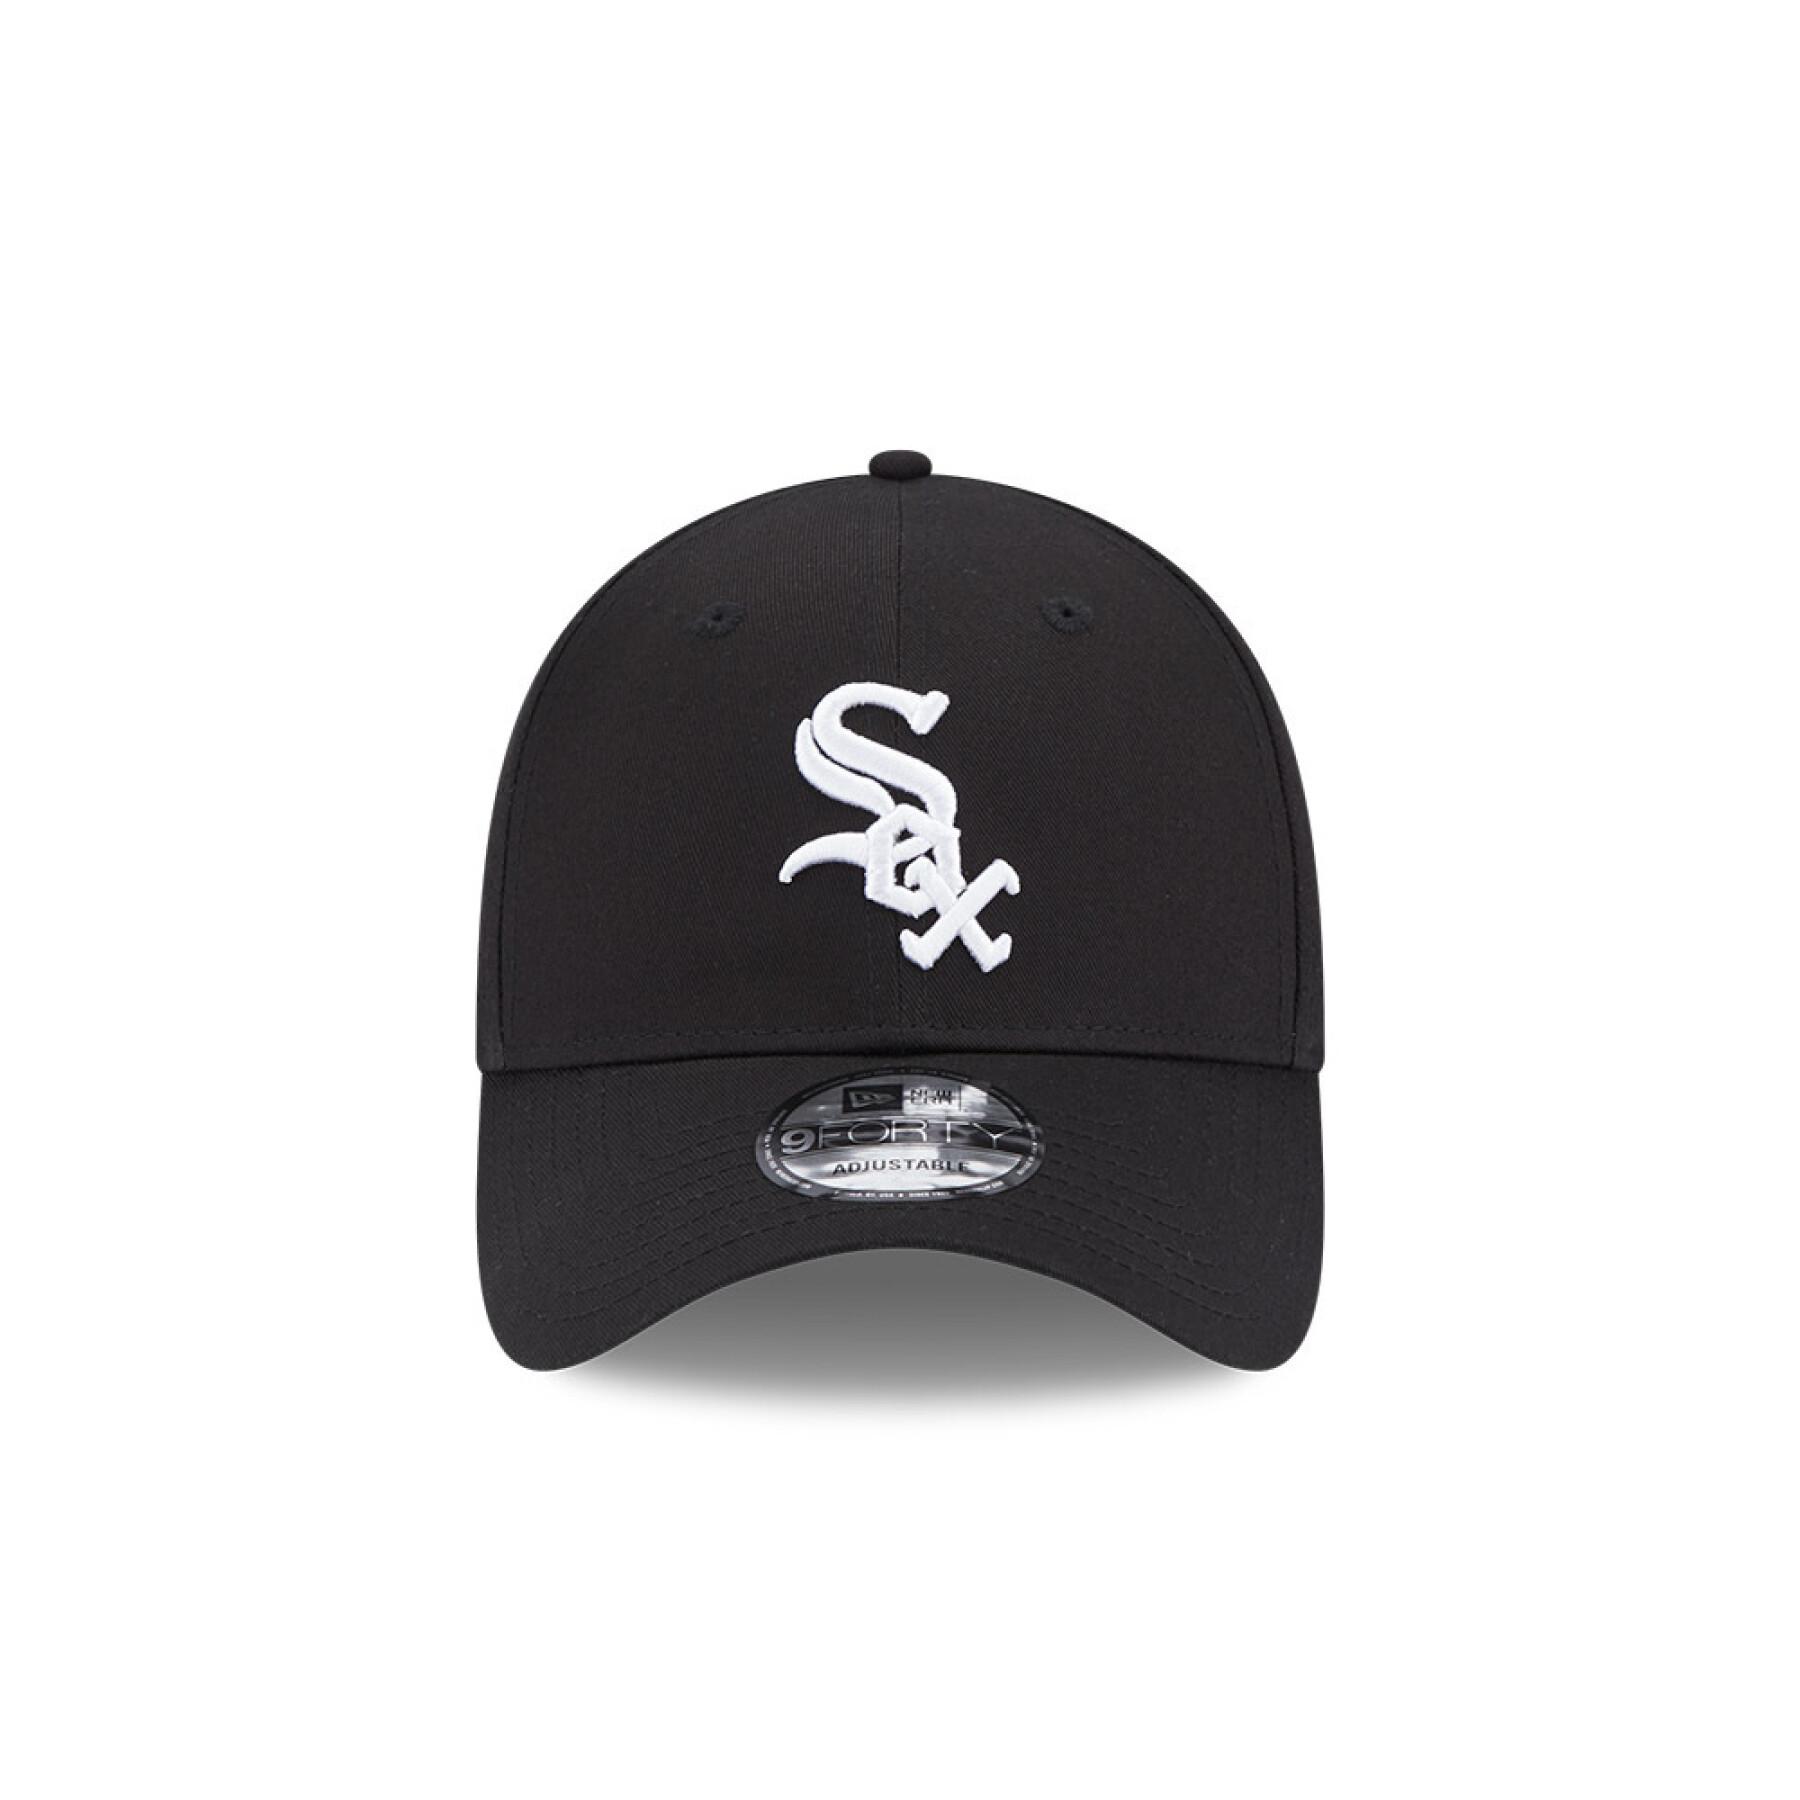 Kappe 9FORTY Chicago White Sox Side Patch